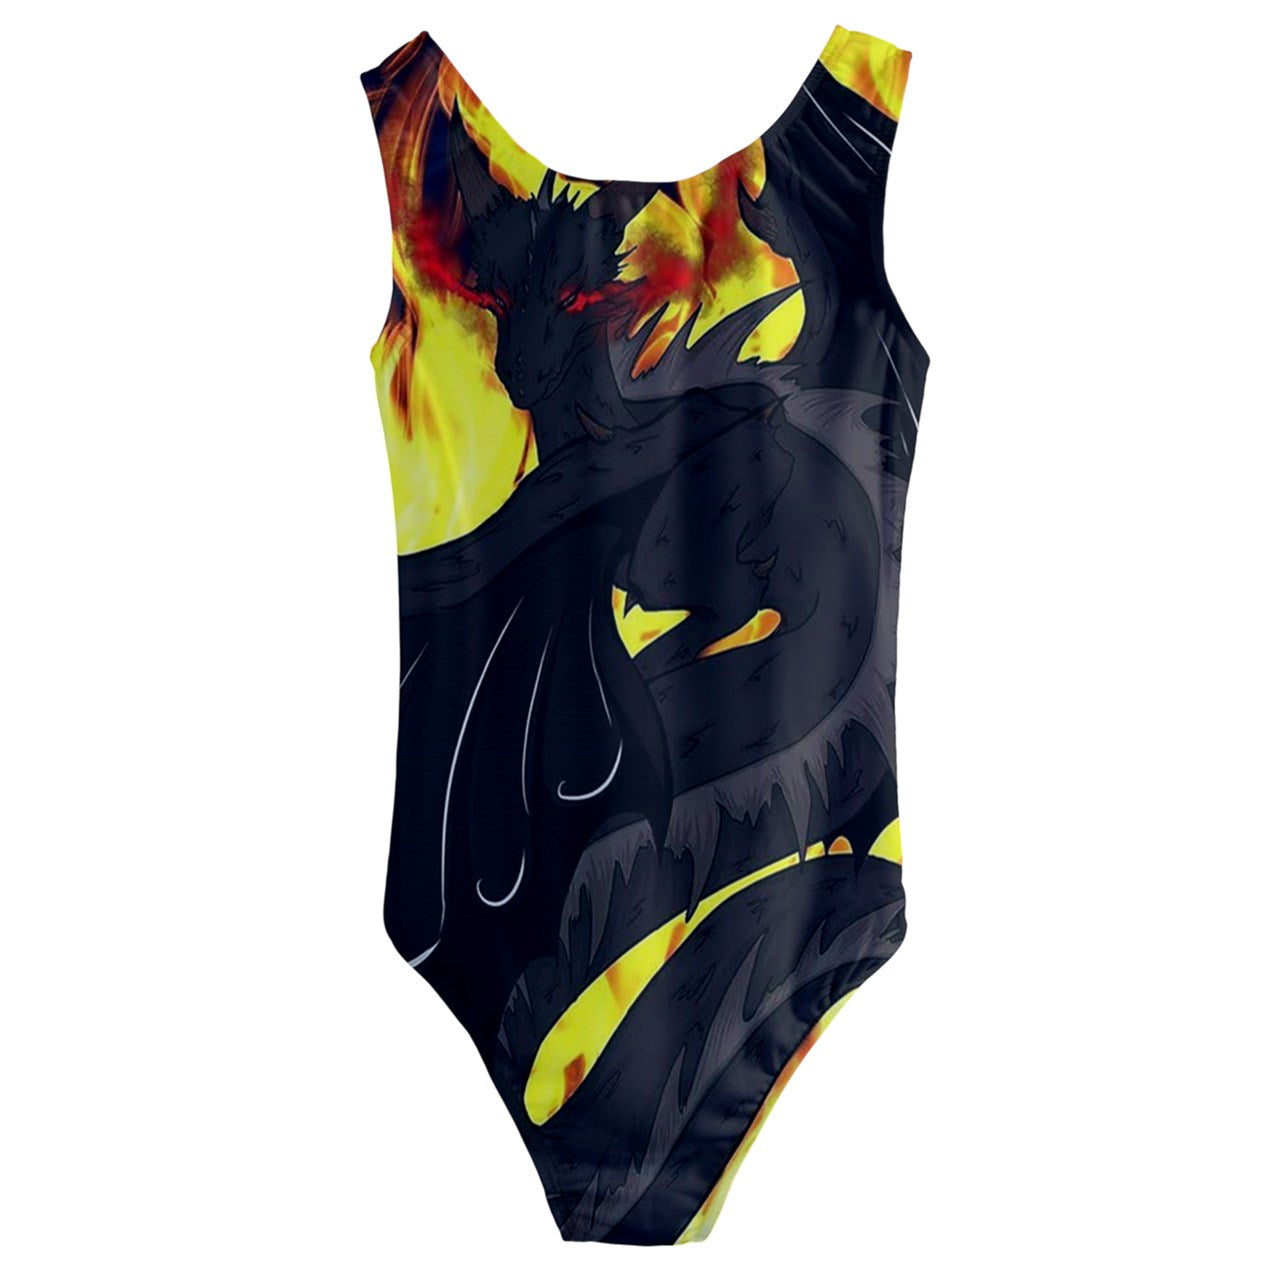 Dragon Torrick - "Flame" - Kids' Cut-Out Back One Piece Swimsuit